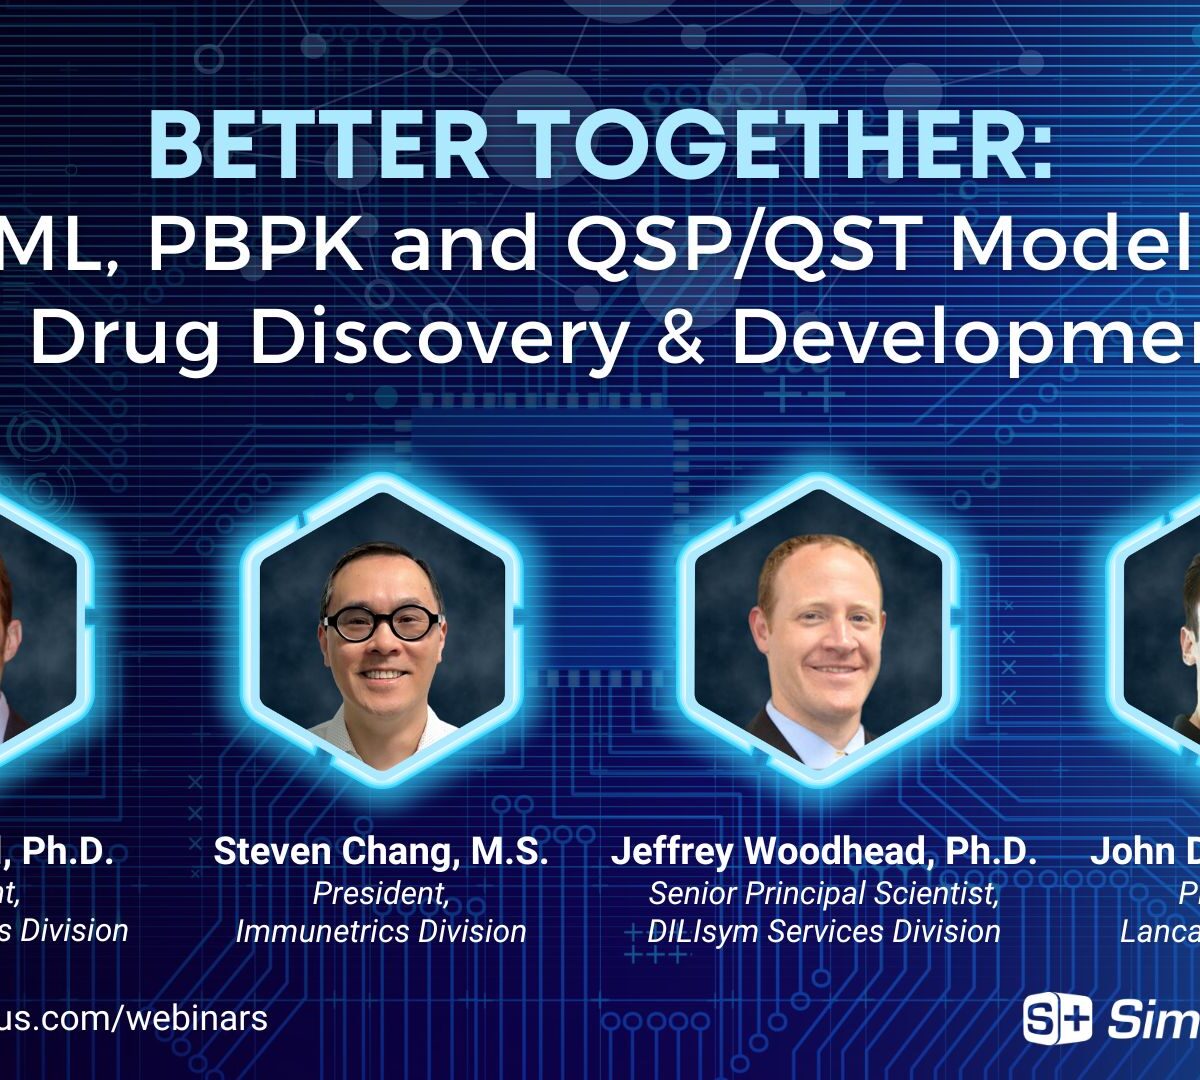 Better Together: AI/ML, PBPK and QSP/QST Modeling in Drug Discovery & Development